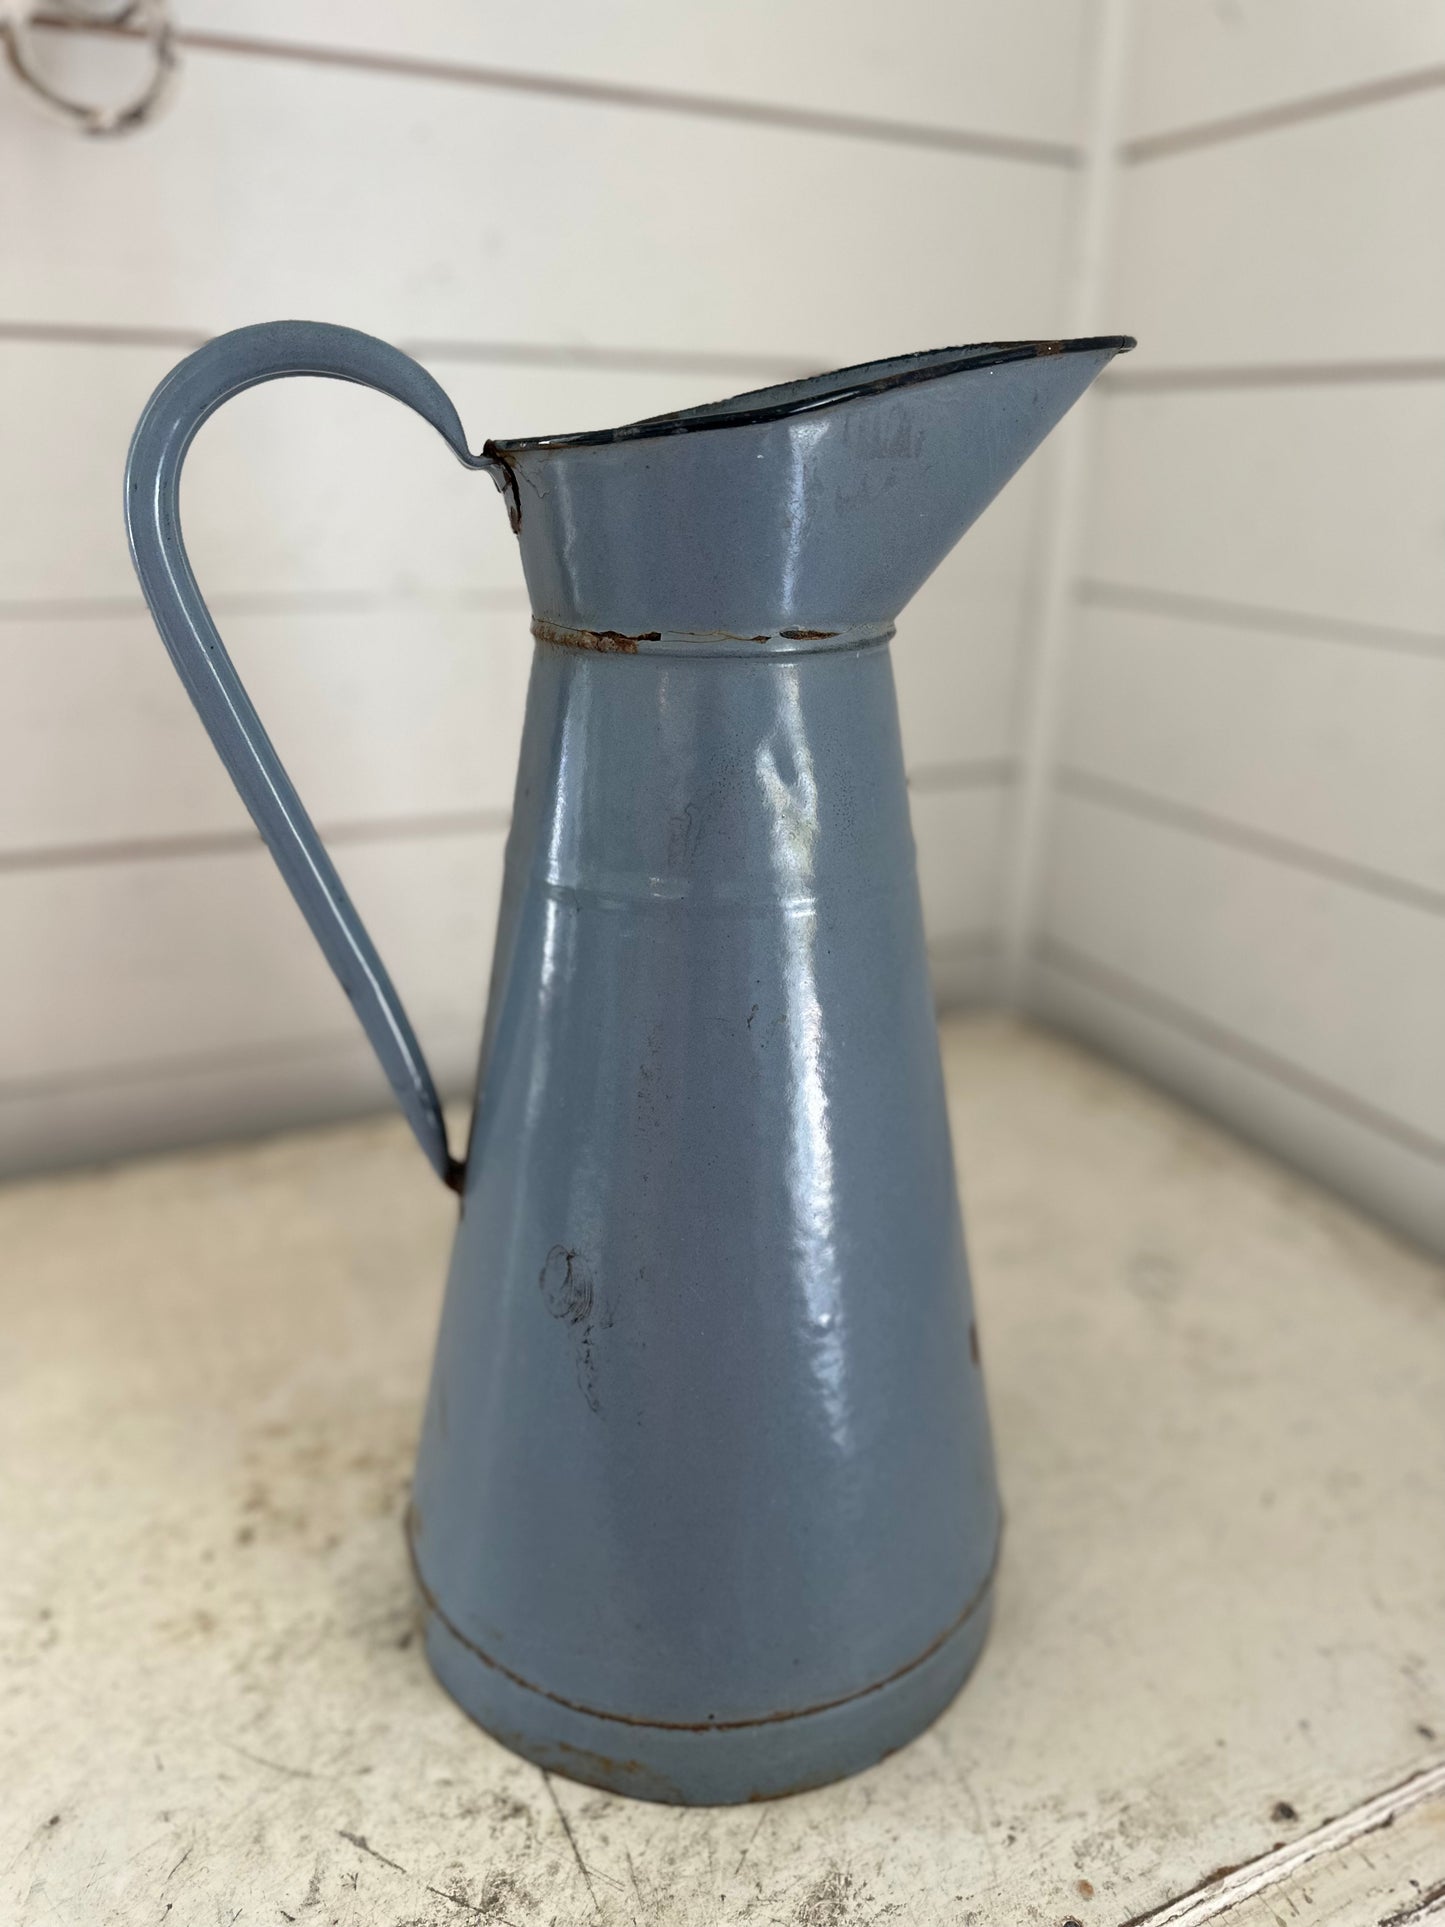 Large Blue French Enamel Pitcher - has wear as shown